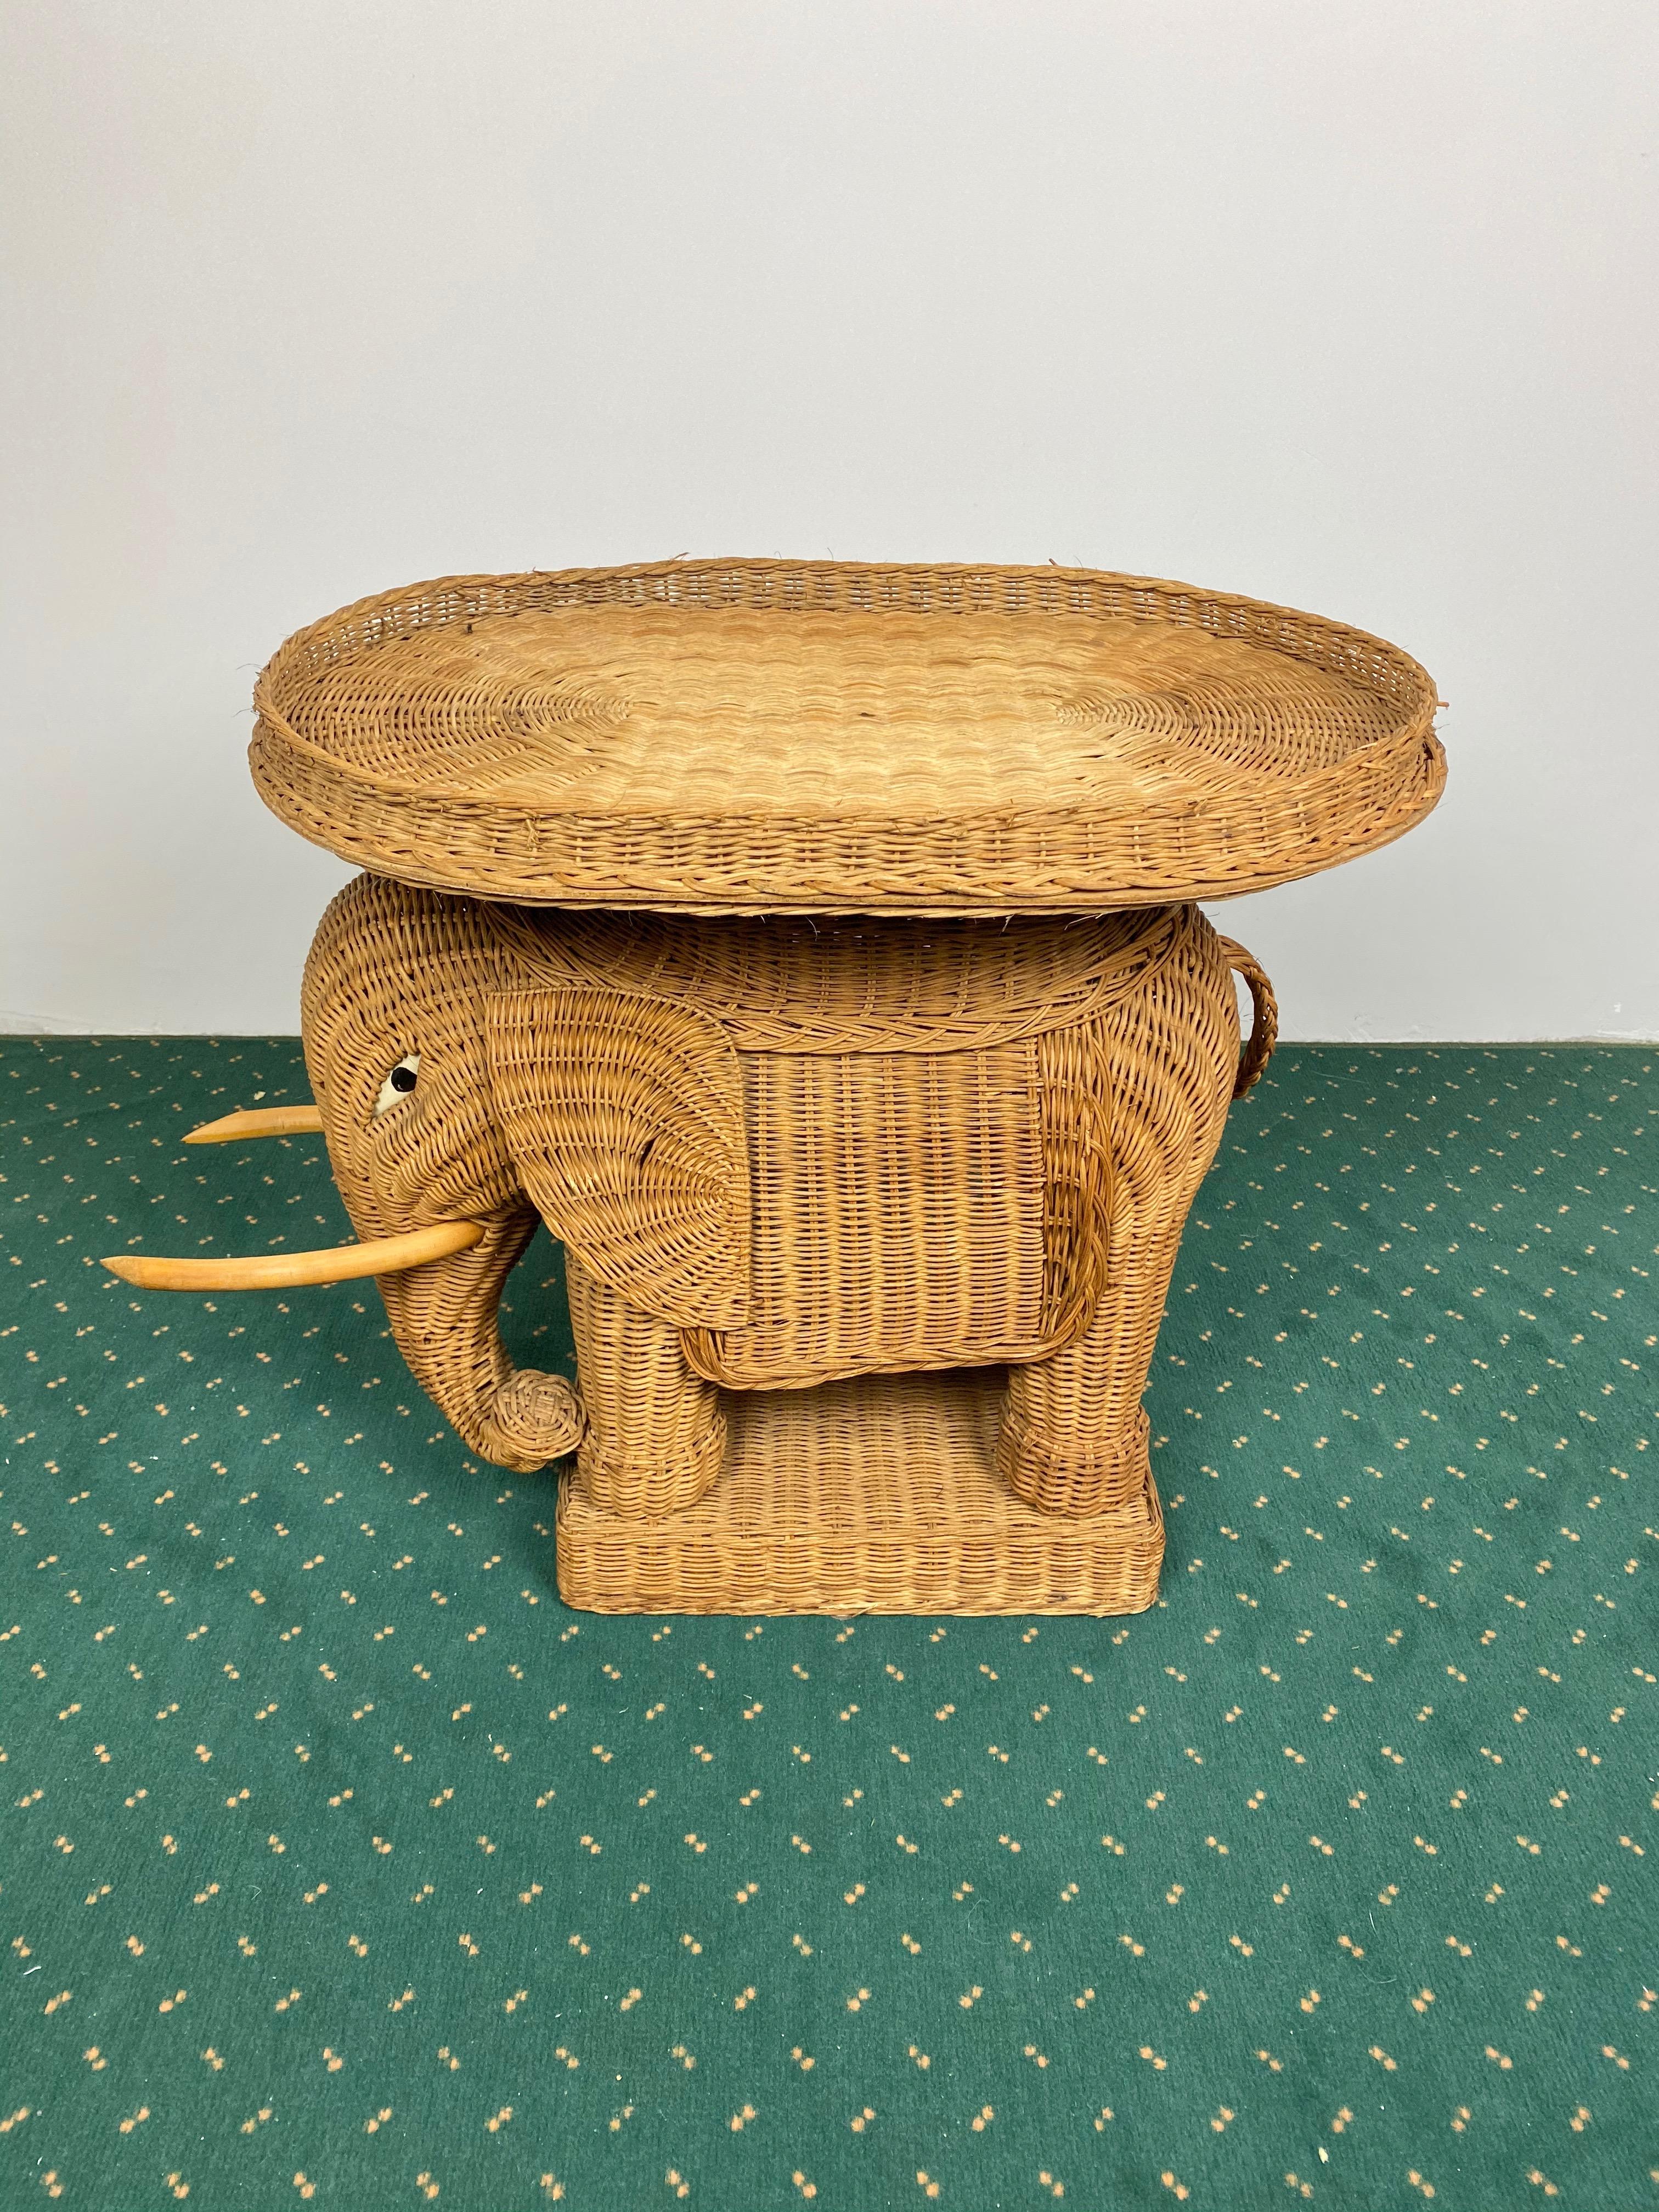 Elephant-shaped end coffee table in hand-braided rattan accented with wood tusks. It also has a removable tray on top of it. Made in France, 1960s.